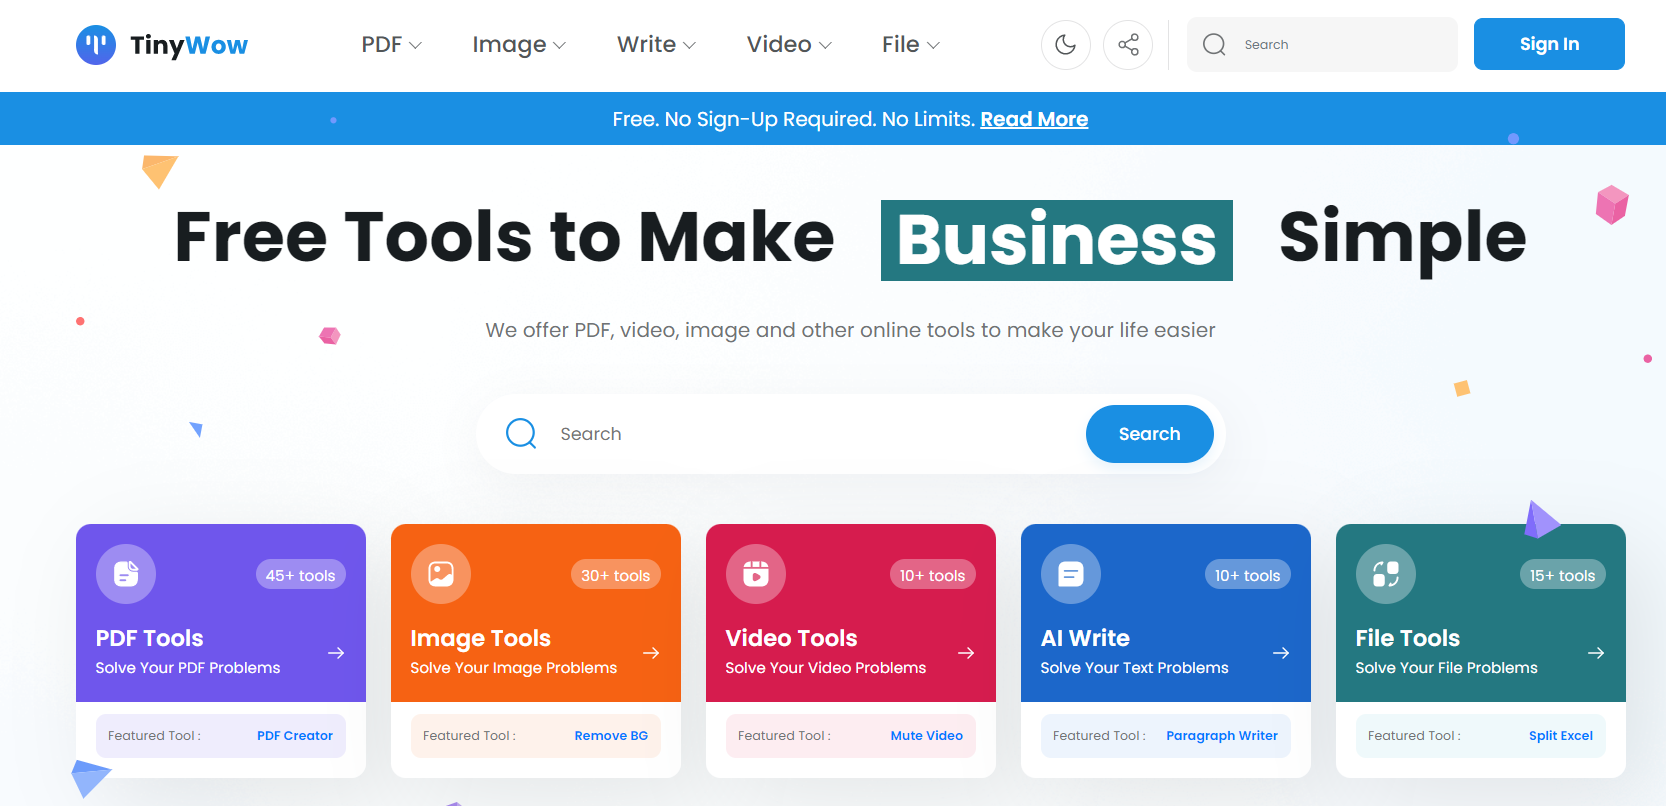 How to Use AI Marketing Tools From tinywow.com